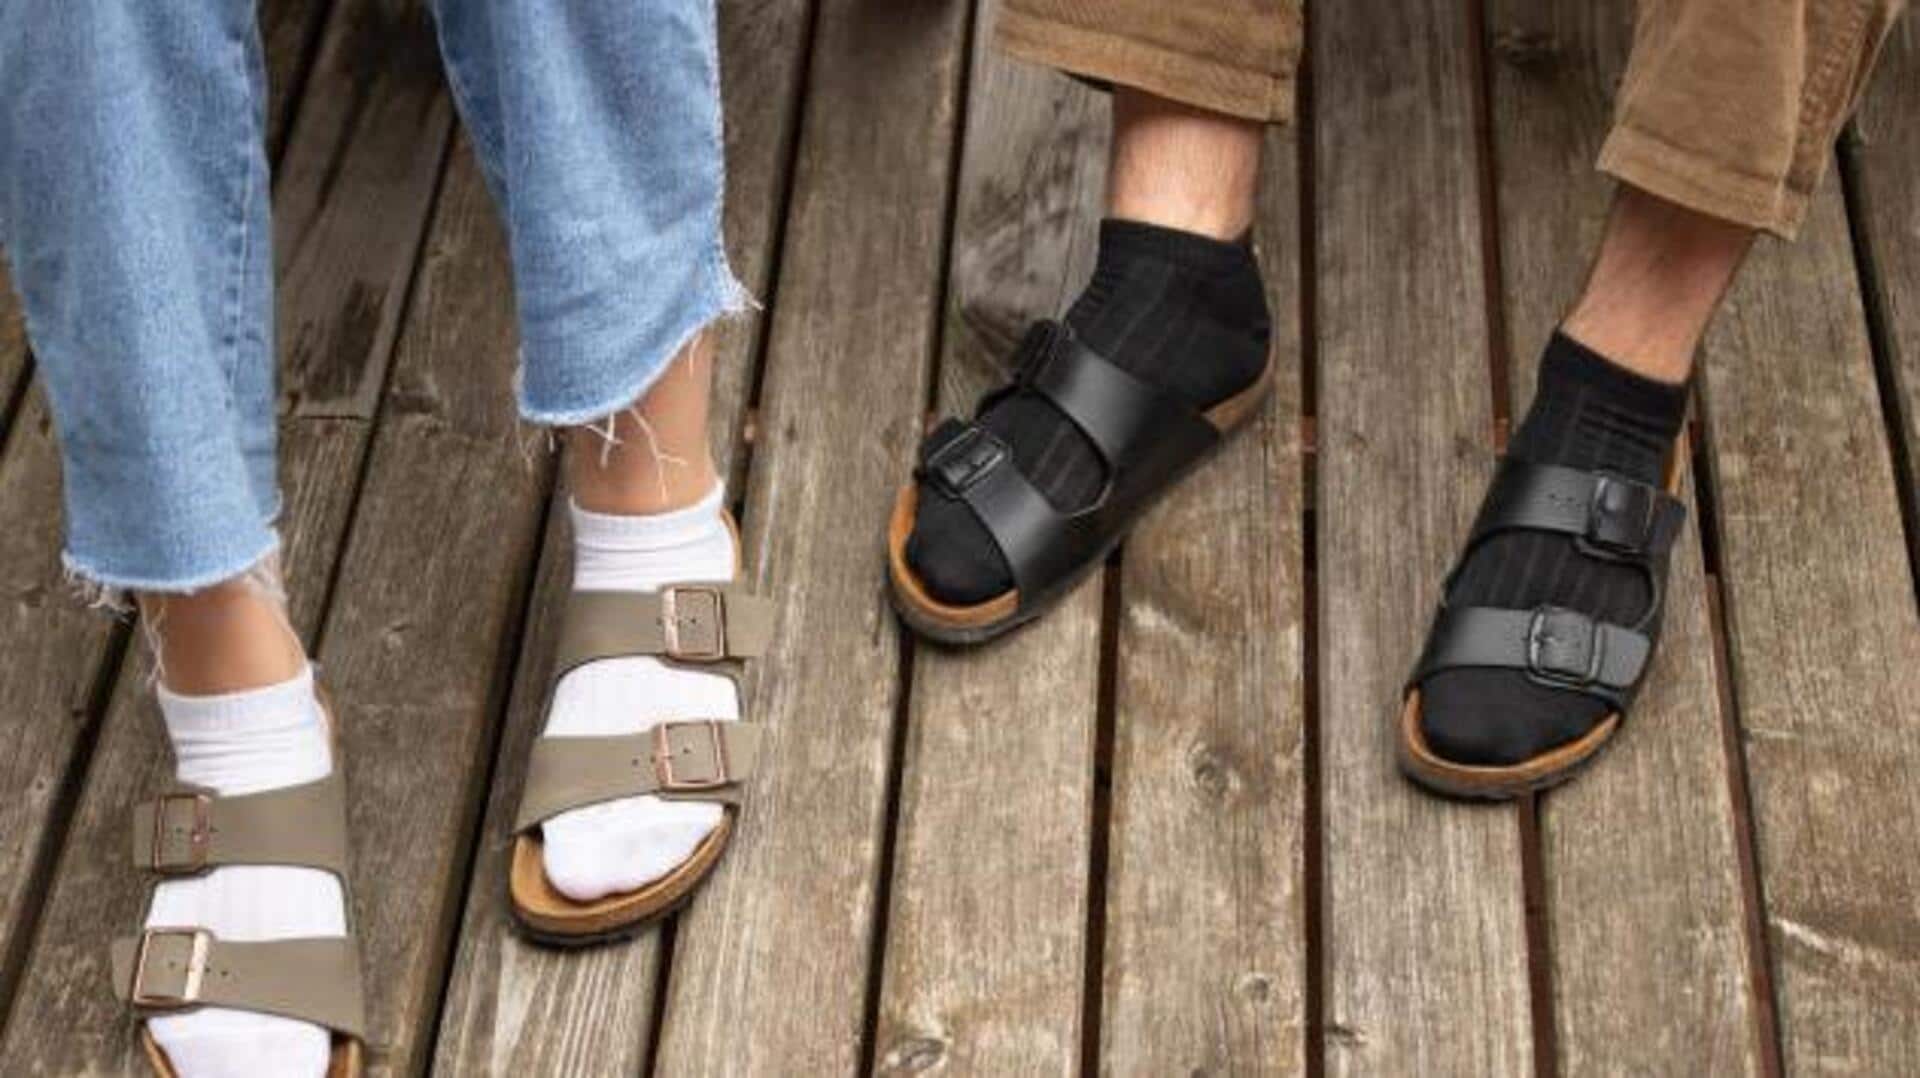 Socks with sandals isn't a fashion misstep anymore